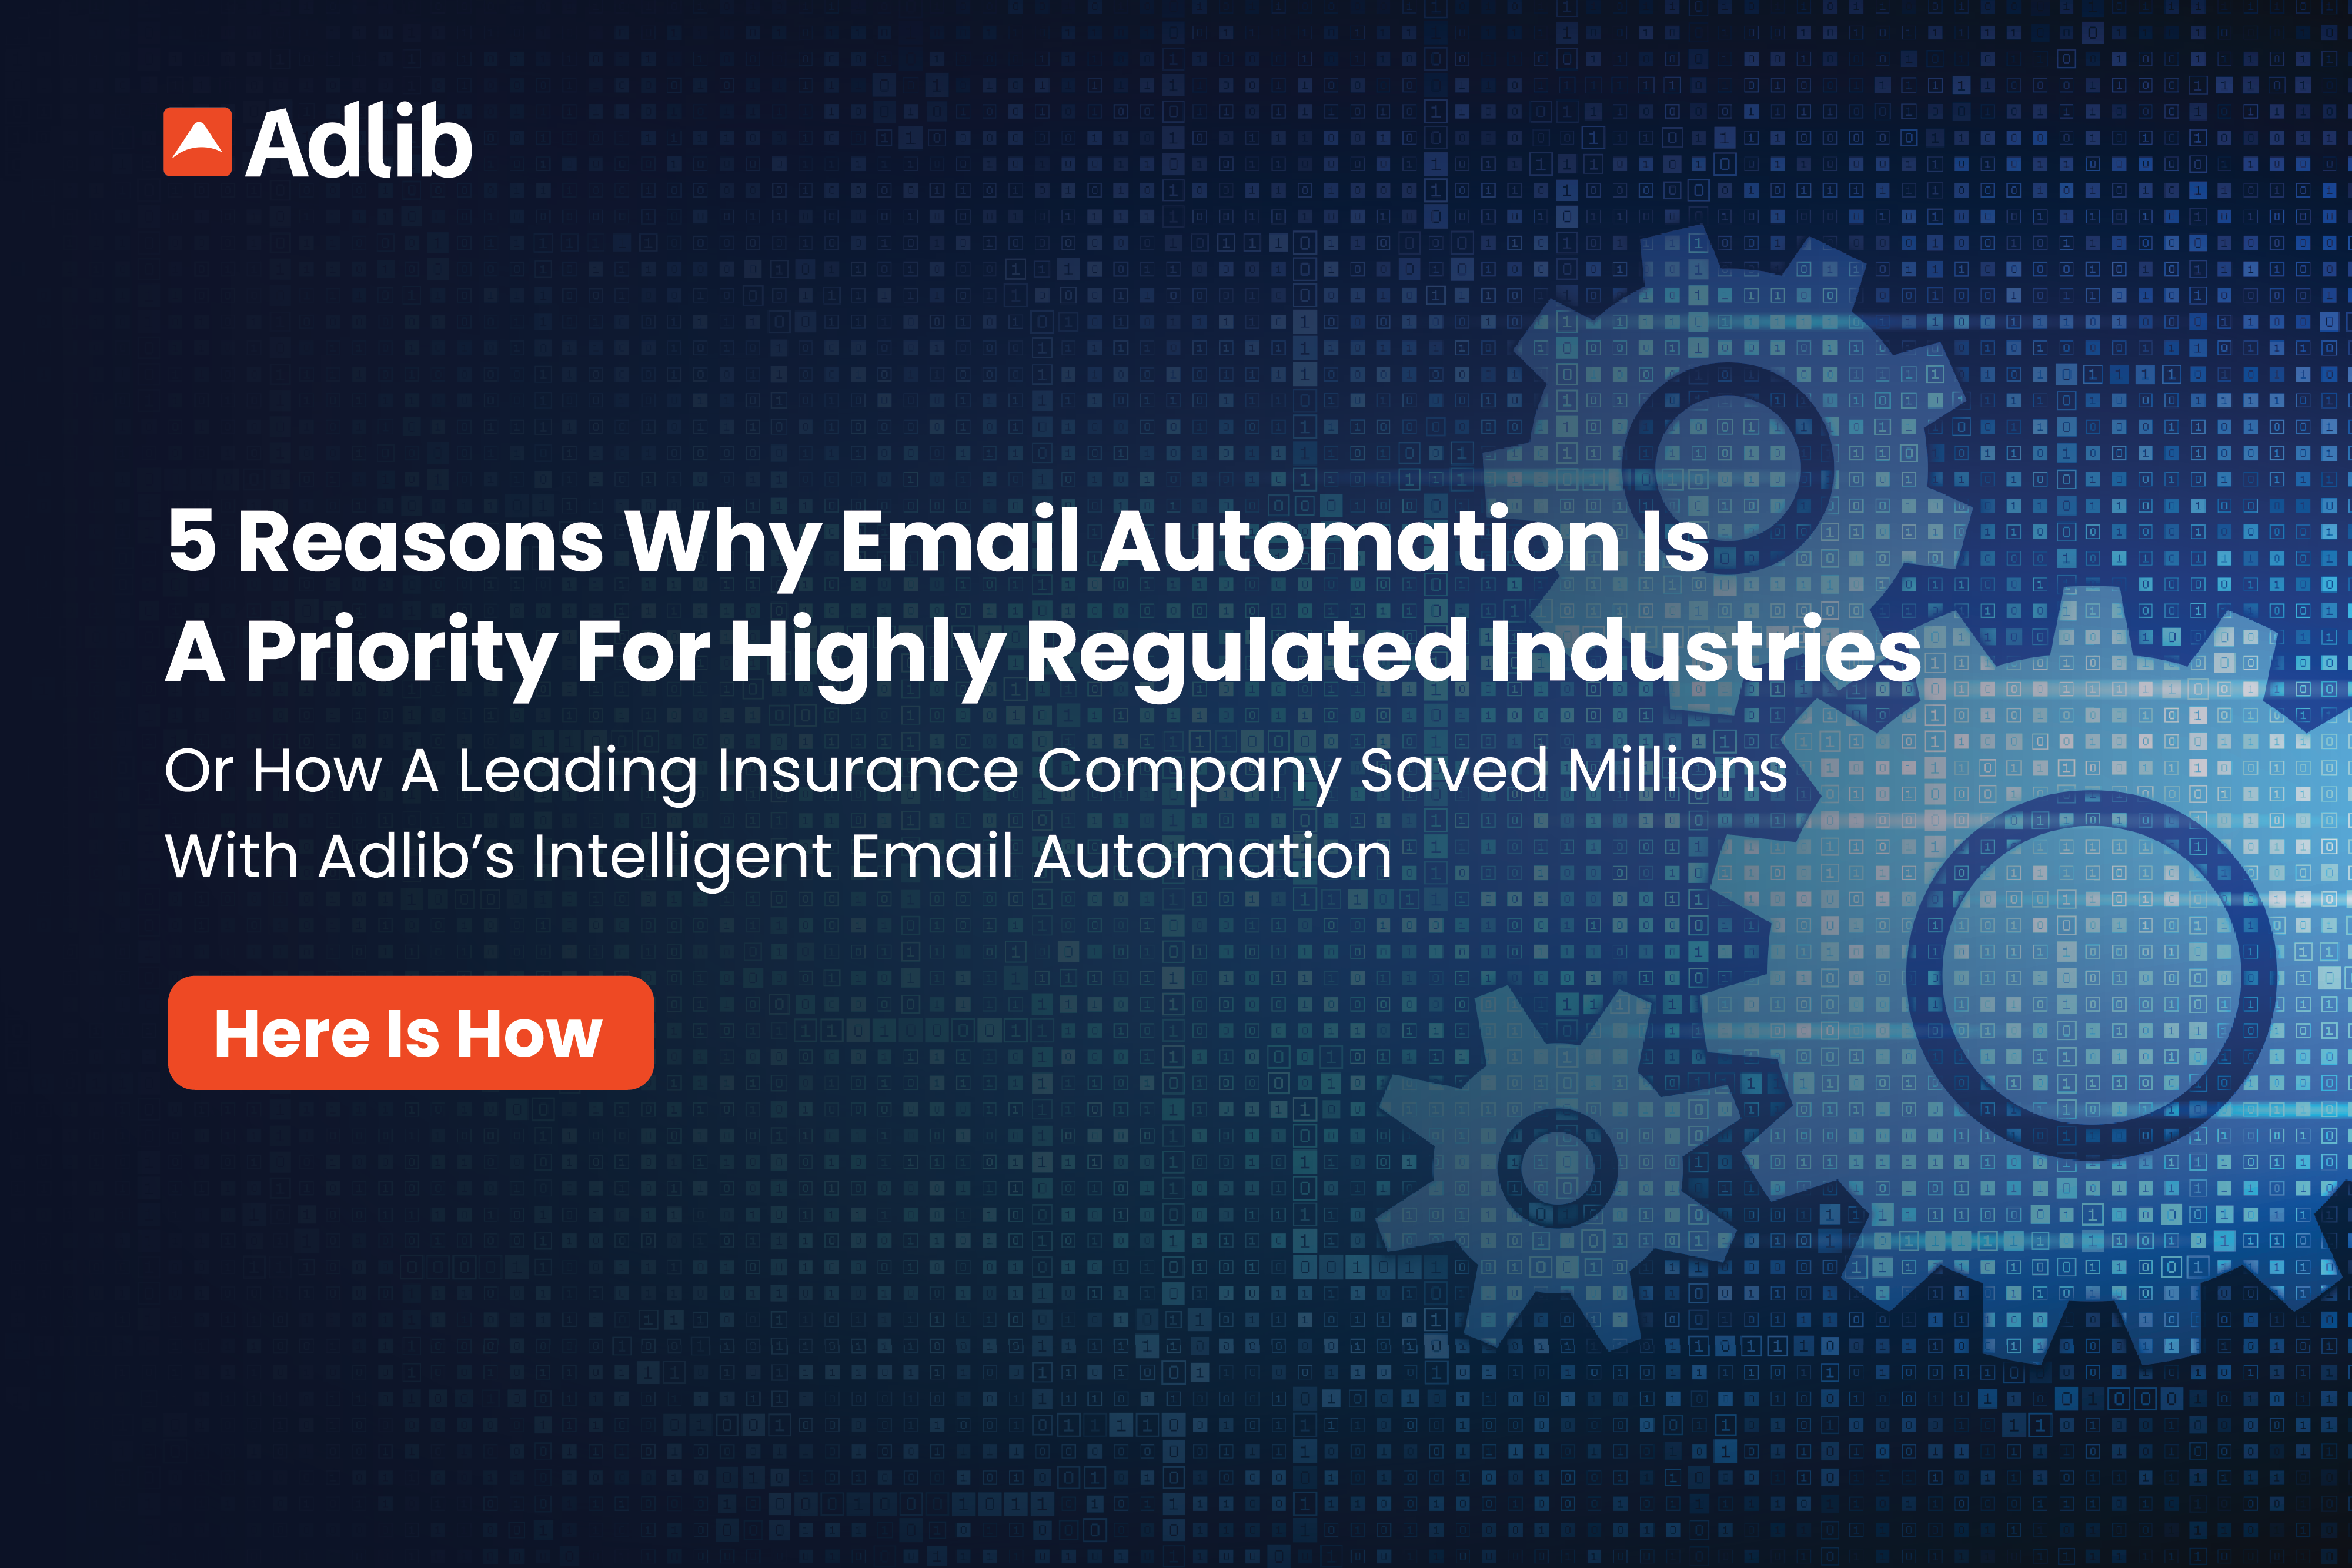 5 Reasons Why Email Automation or Digital Mailroom Is A Priority For Highly Regulated Industries Featured Image